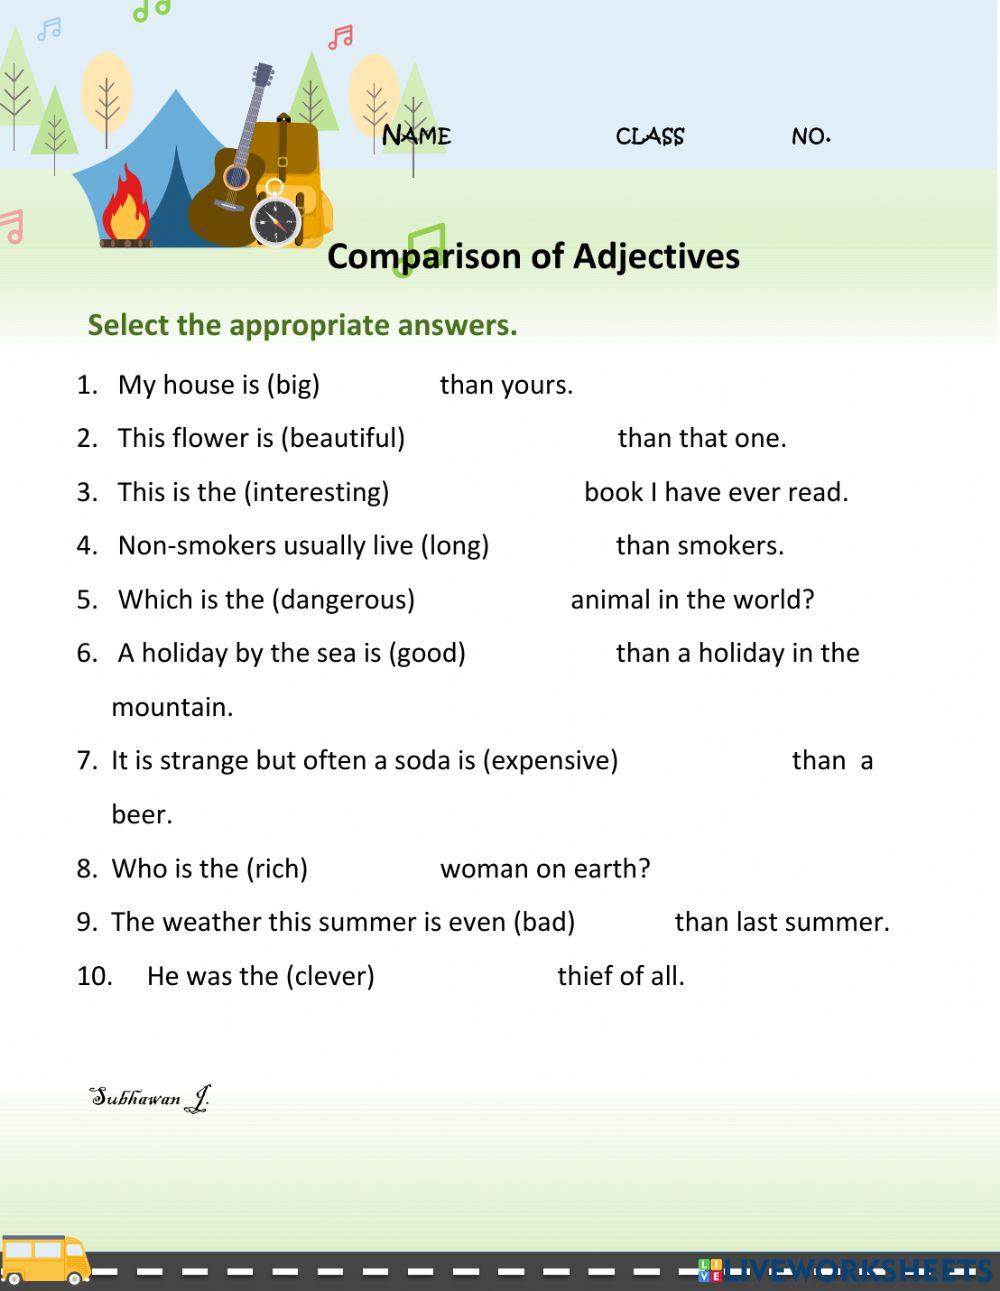 Comparision of Adjectives